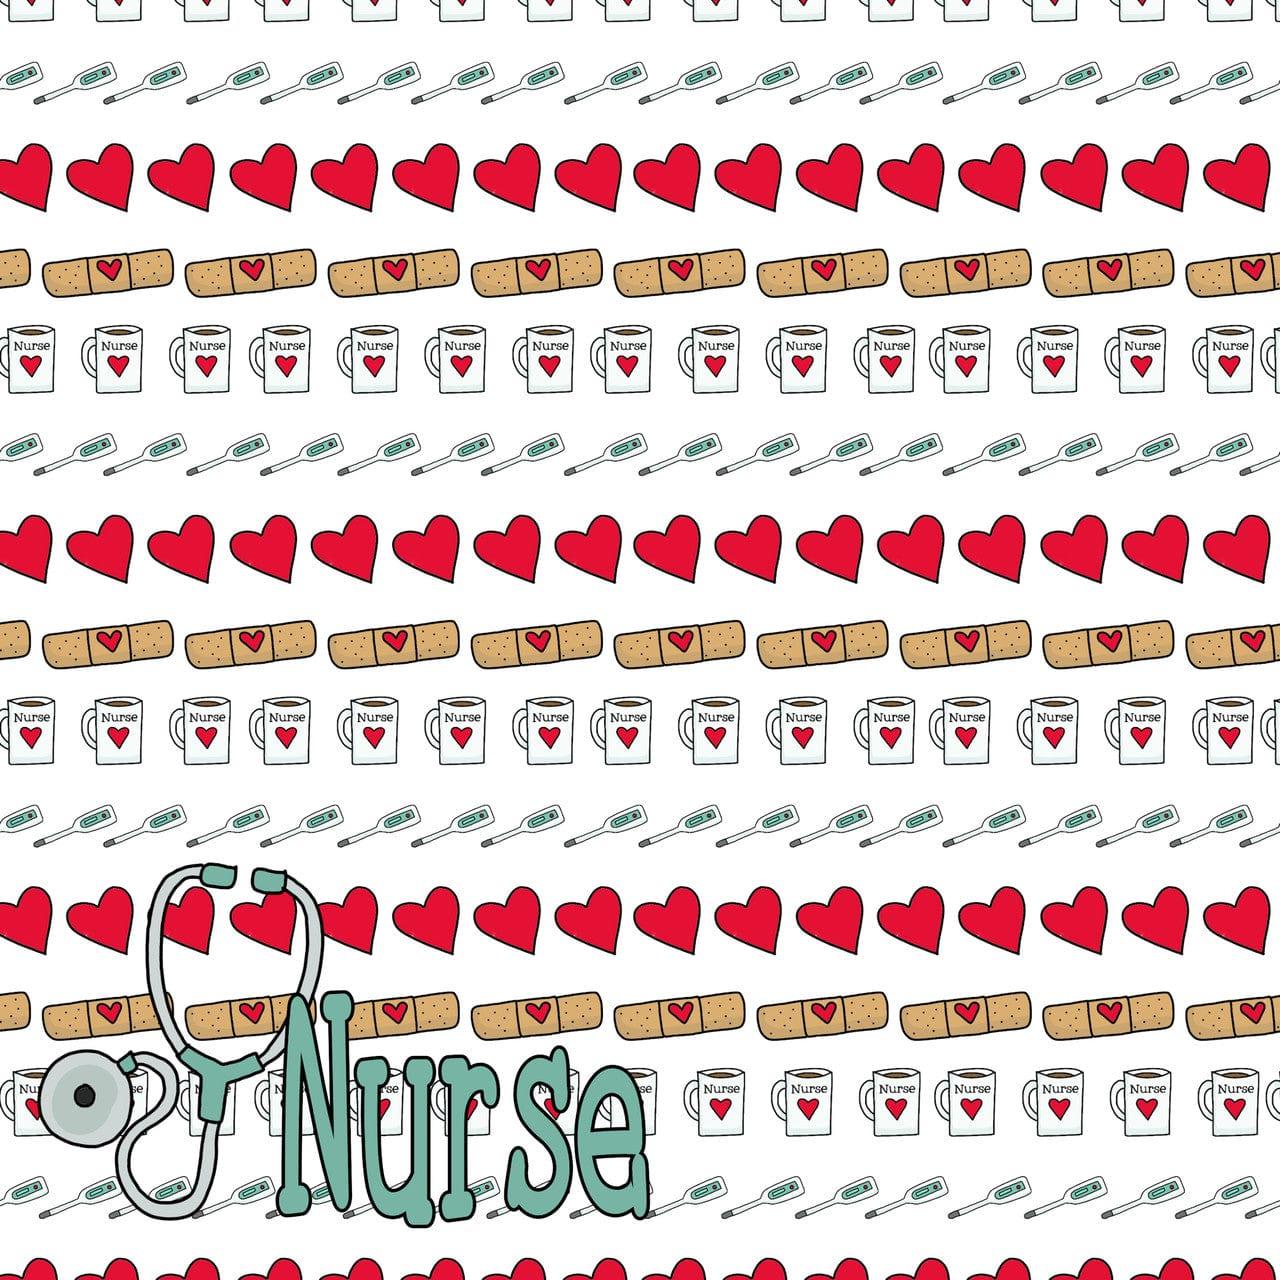 Occupation Collection Nurse Pride 12 x 12 Double Sided Scrapbook Paper by SSC Designs - Scrapbook Supply Companies